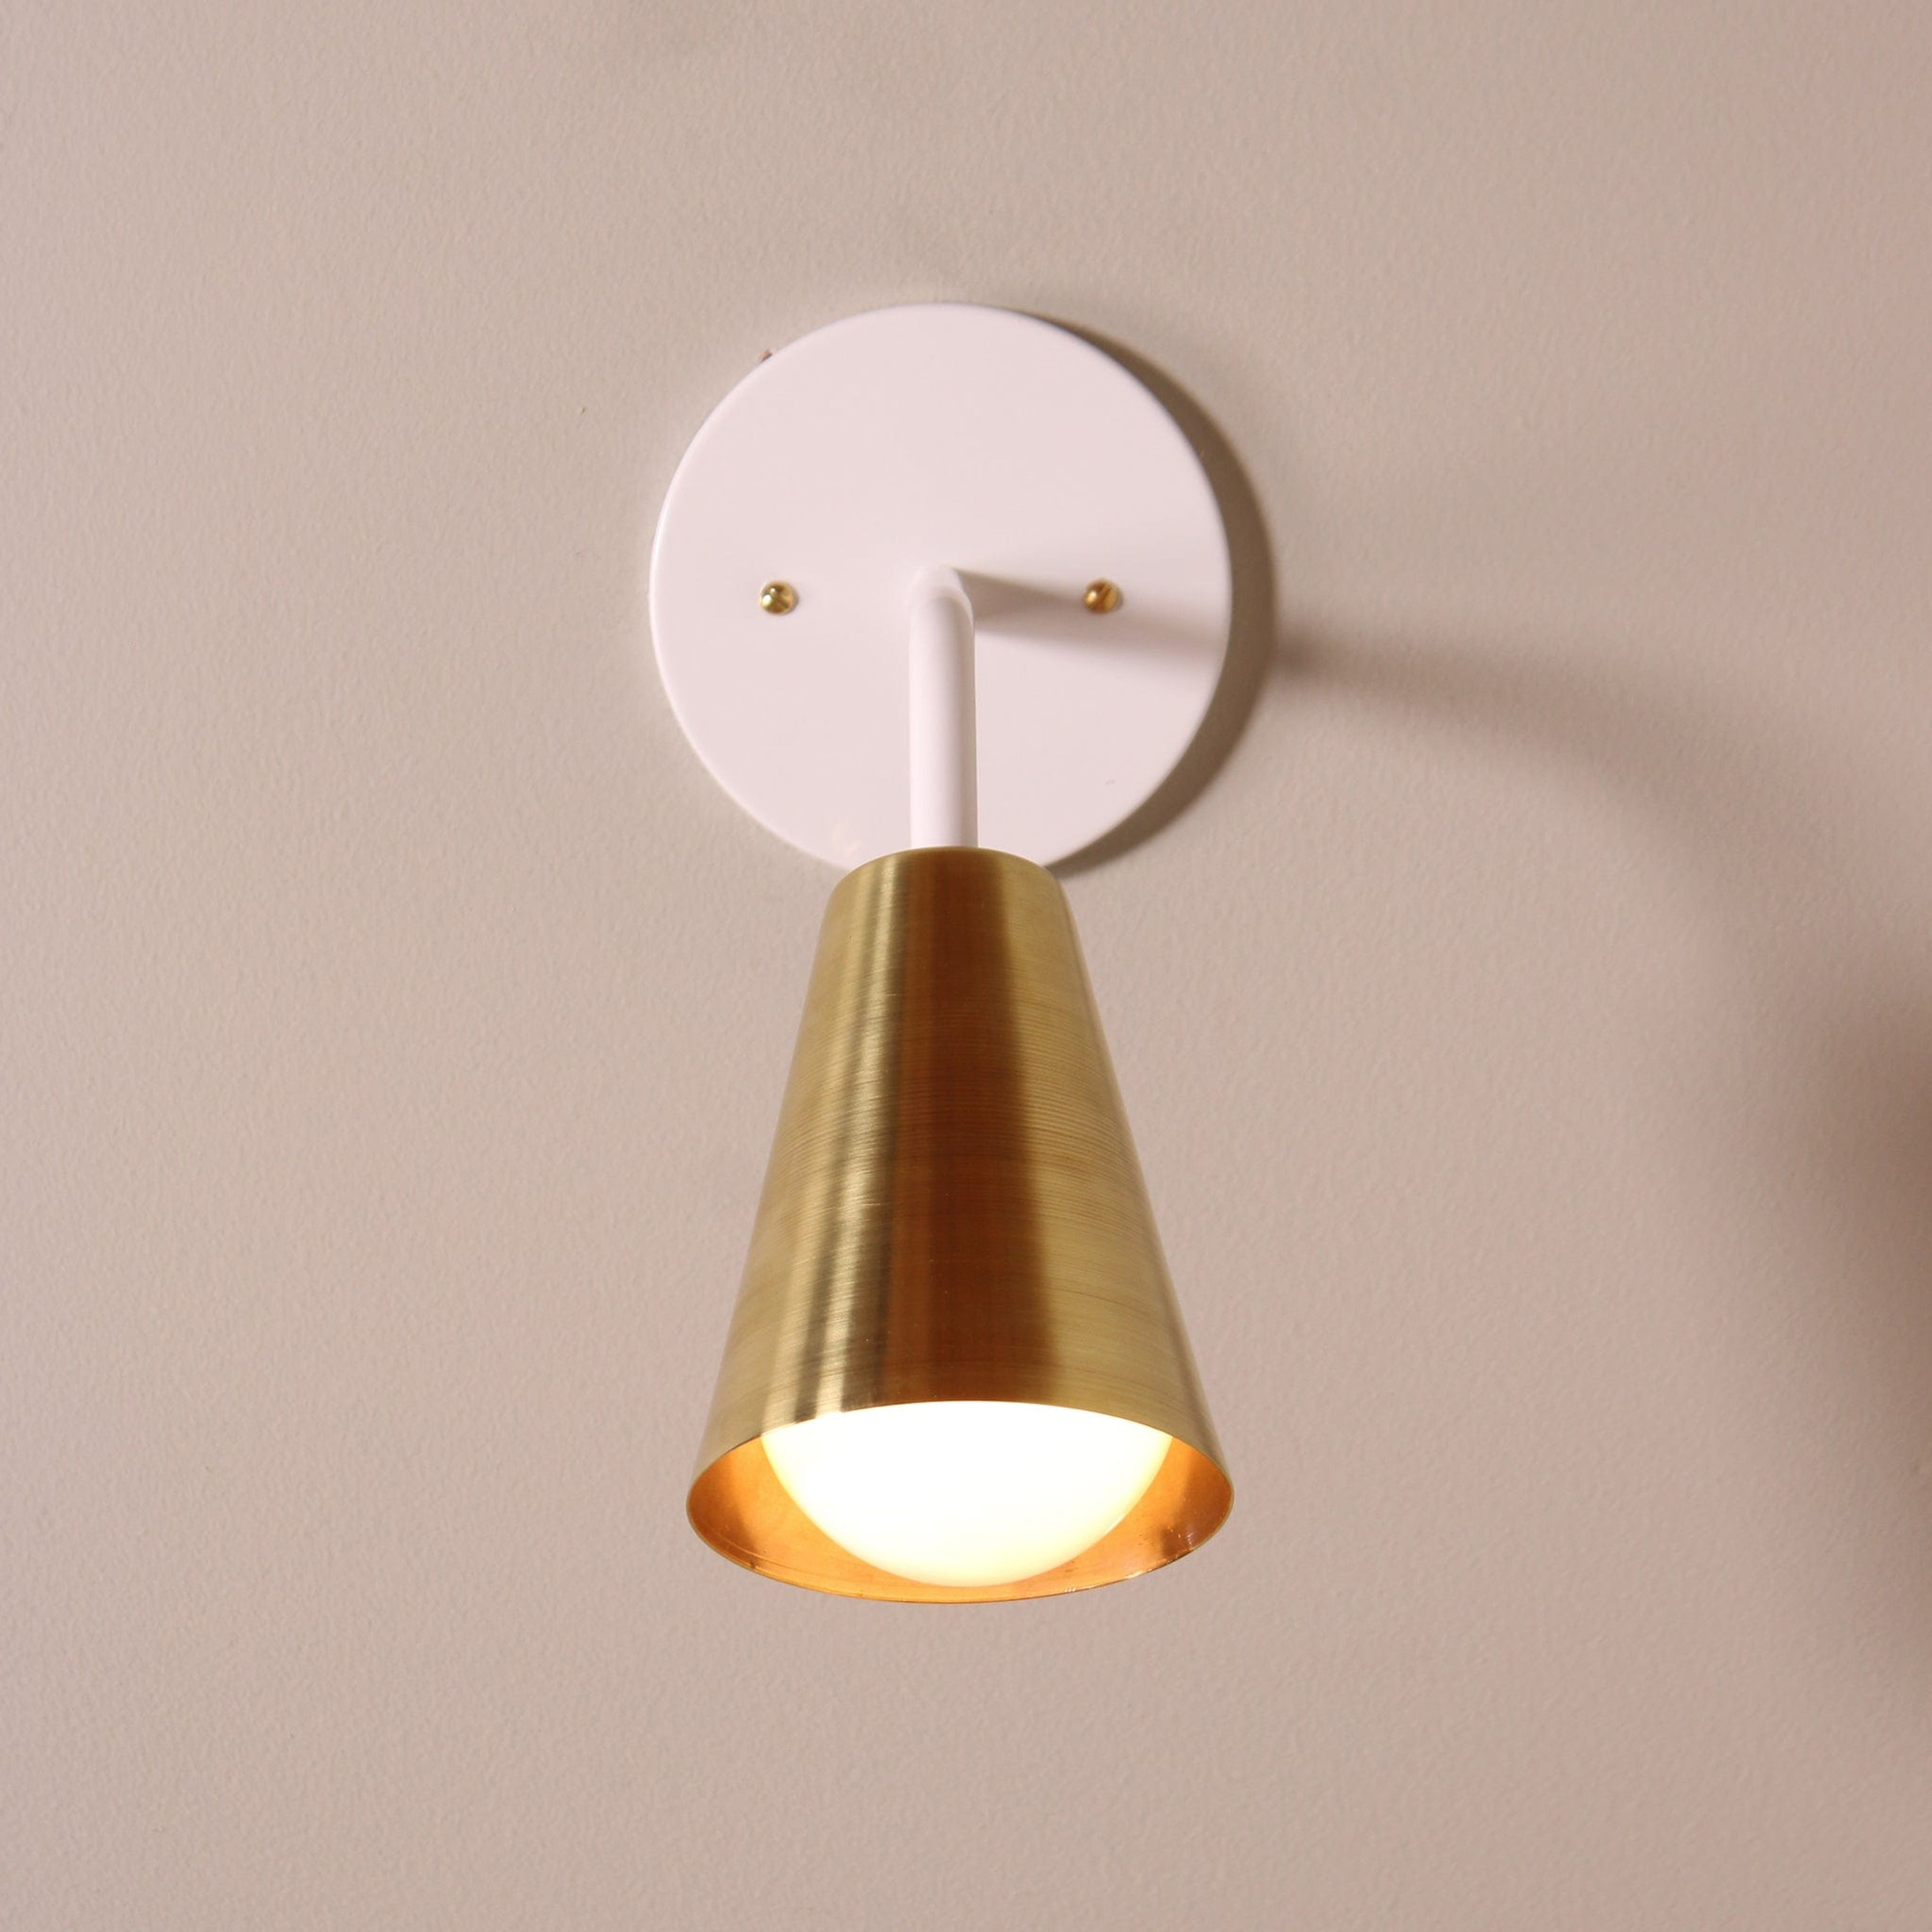 Monte Carlo wall sconce